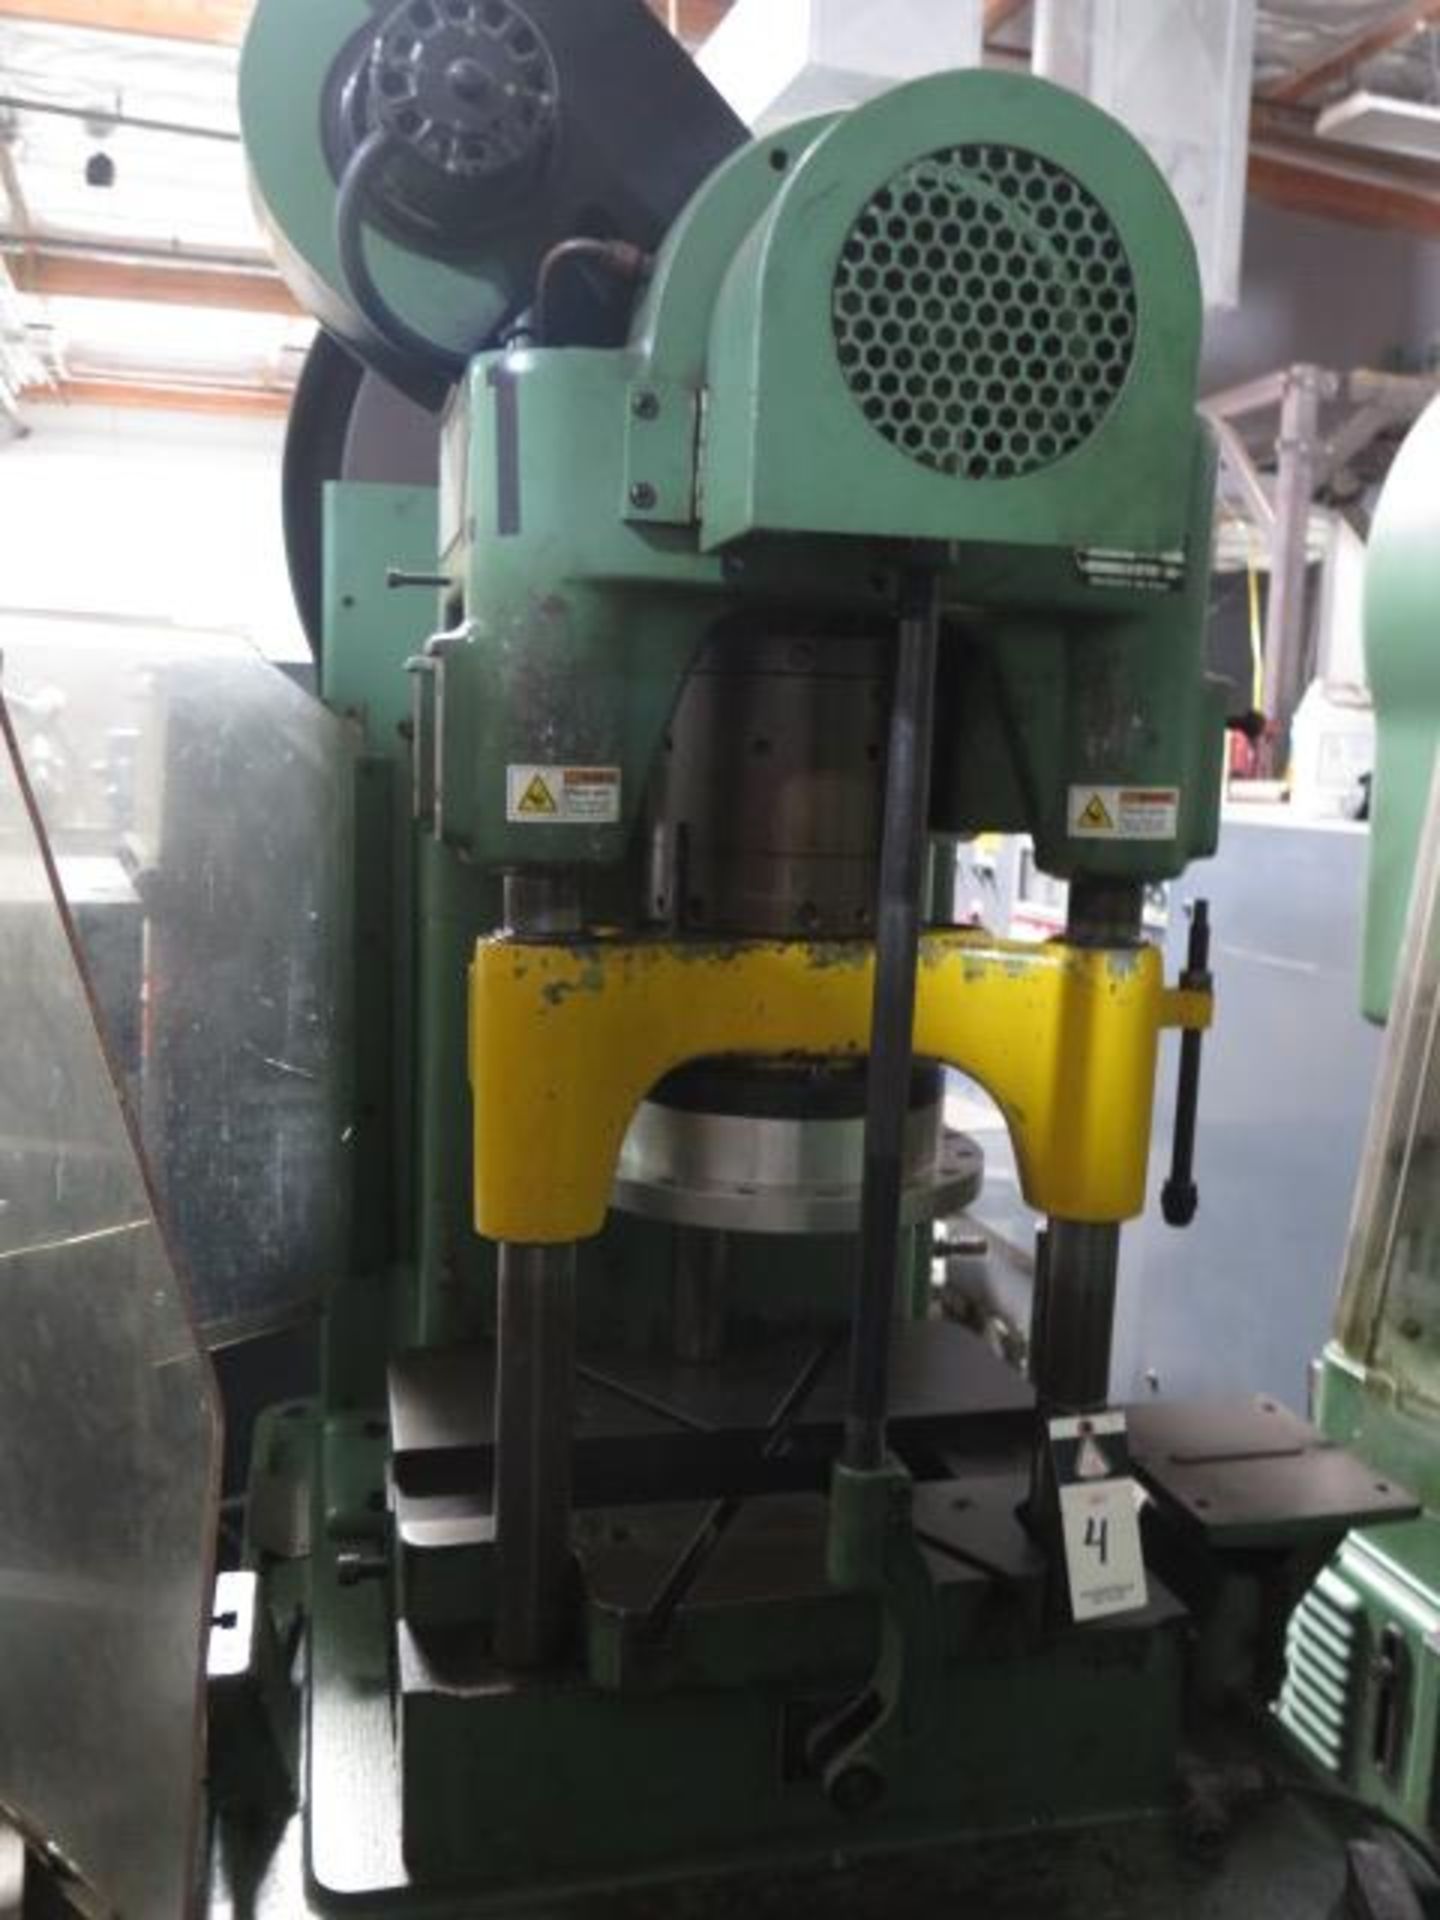 Bruderer BSTA30 33-Ton High Speed Stamping Press w/ Bruderer Controls, SOLD AS IS WITH NO WARRANTY